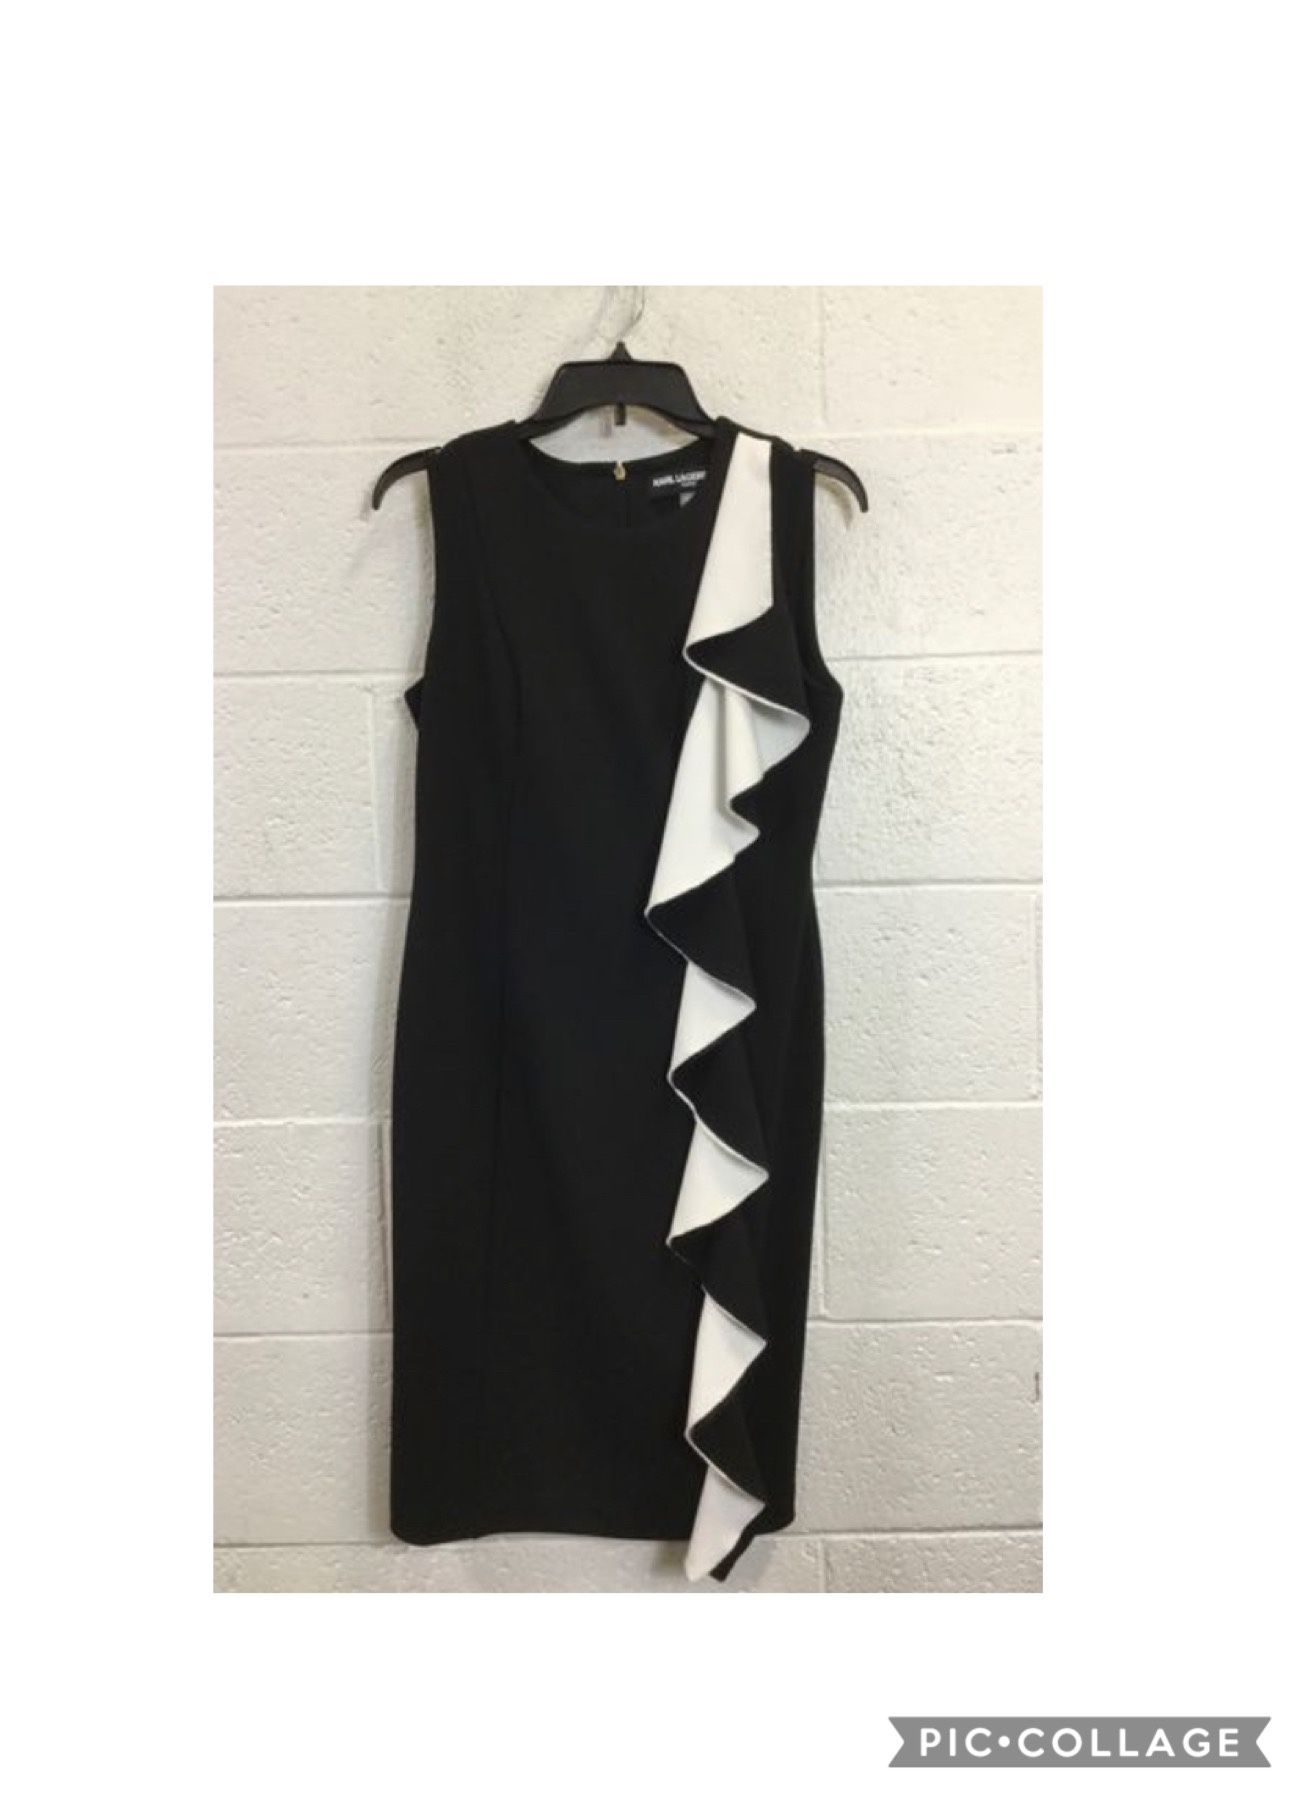 Karl Lagerfeld Black and White Dress Size 6